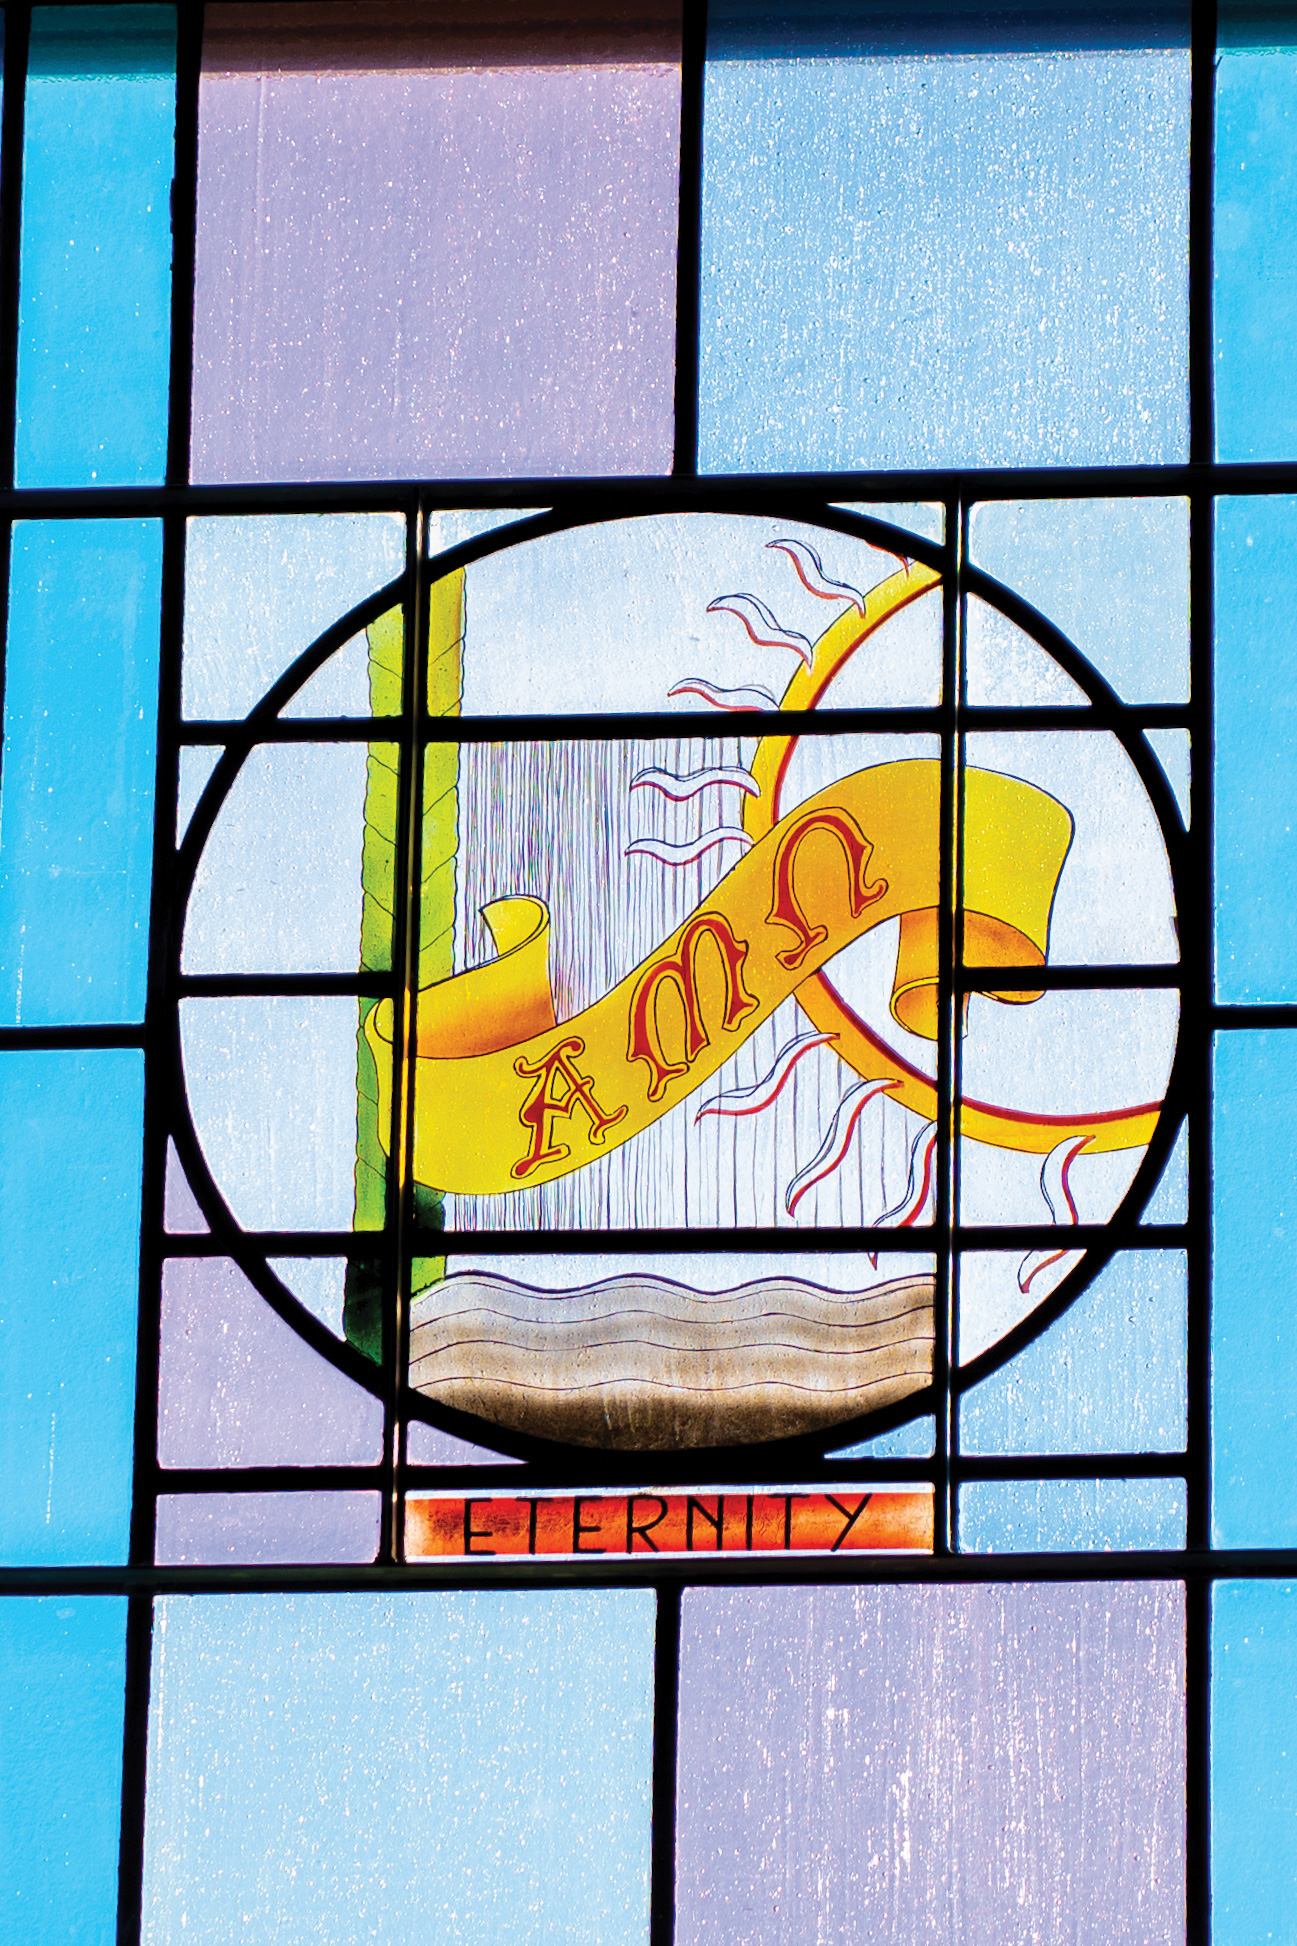 Stained Glass Artwork With The Label Eternity